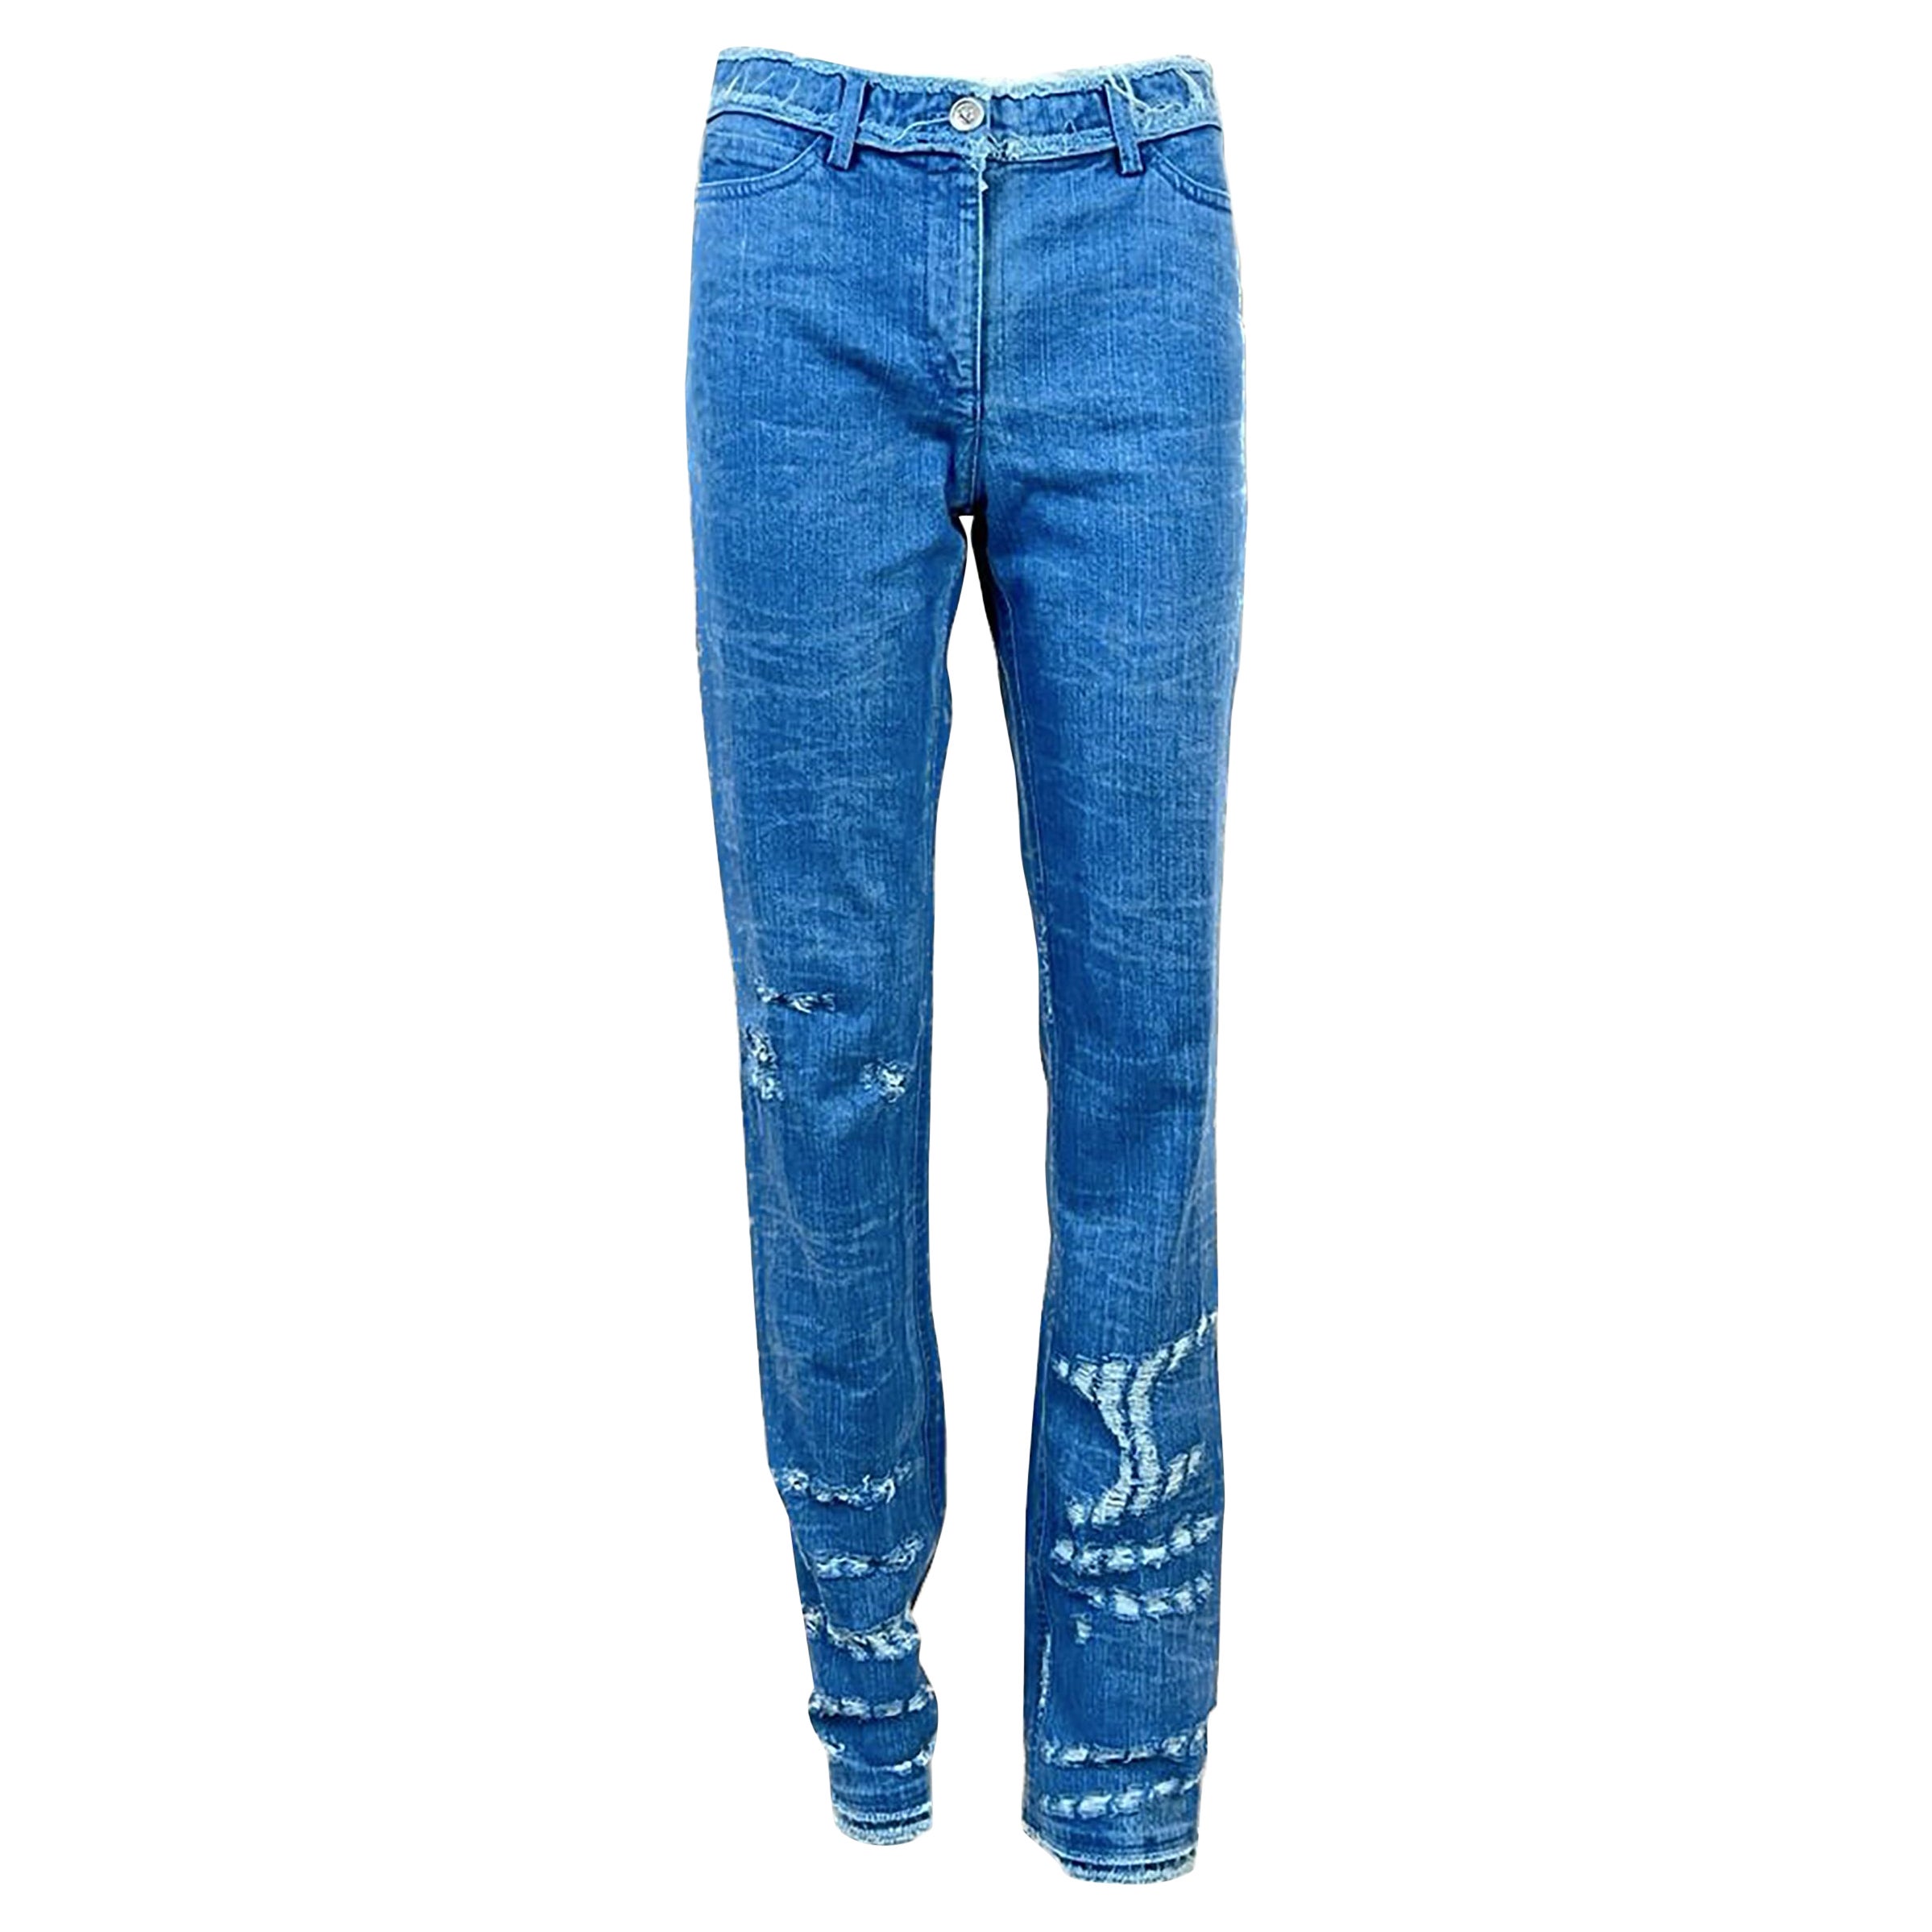 Chanel New Distressed Jeans im Angebot